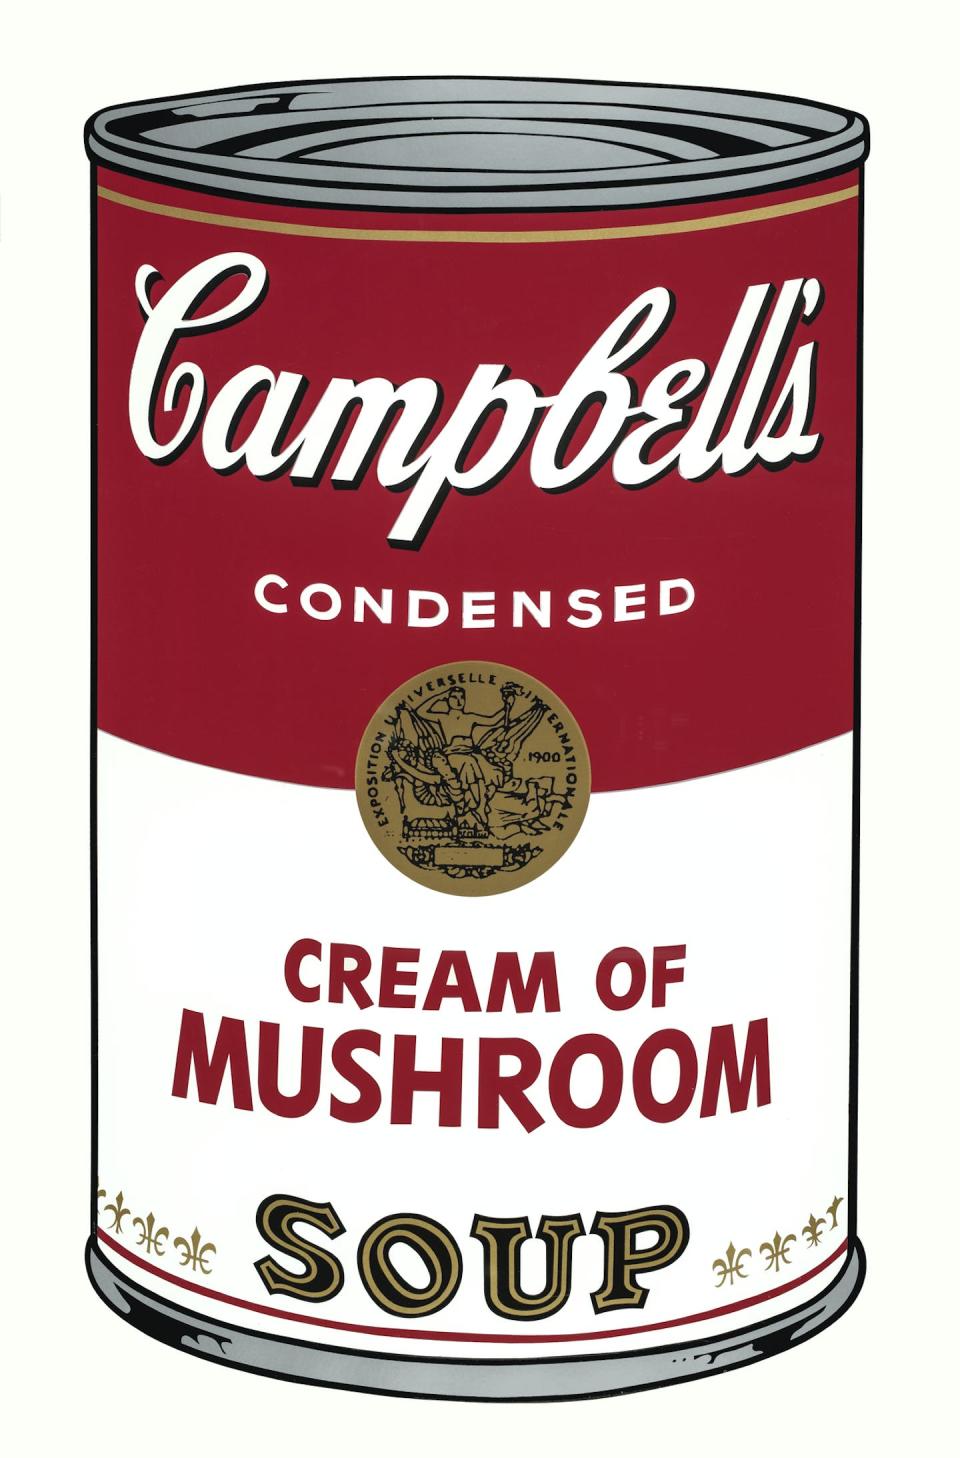 Andy Warhol, born Pittsburgh, Pennsylvania, United States 1928, died New York, United States 1987, Cream of mushroom soup, 1968, New York, colour screenprint on paper, 81.0 x 47.5 cm (image), 88.8 x 58.5 cm (sheet); South Australian Government Grant 1977, Art Gallery of South Australia, Adelaide, © Andy Warhol Foundation for the Visual Arts, Inc. ARS/Copyright Agency.